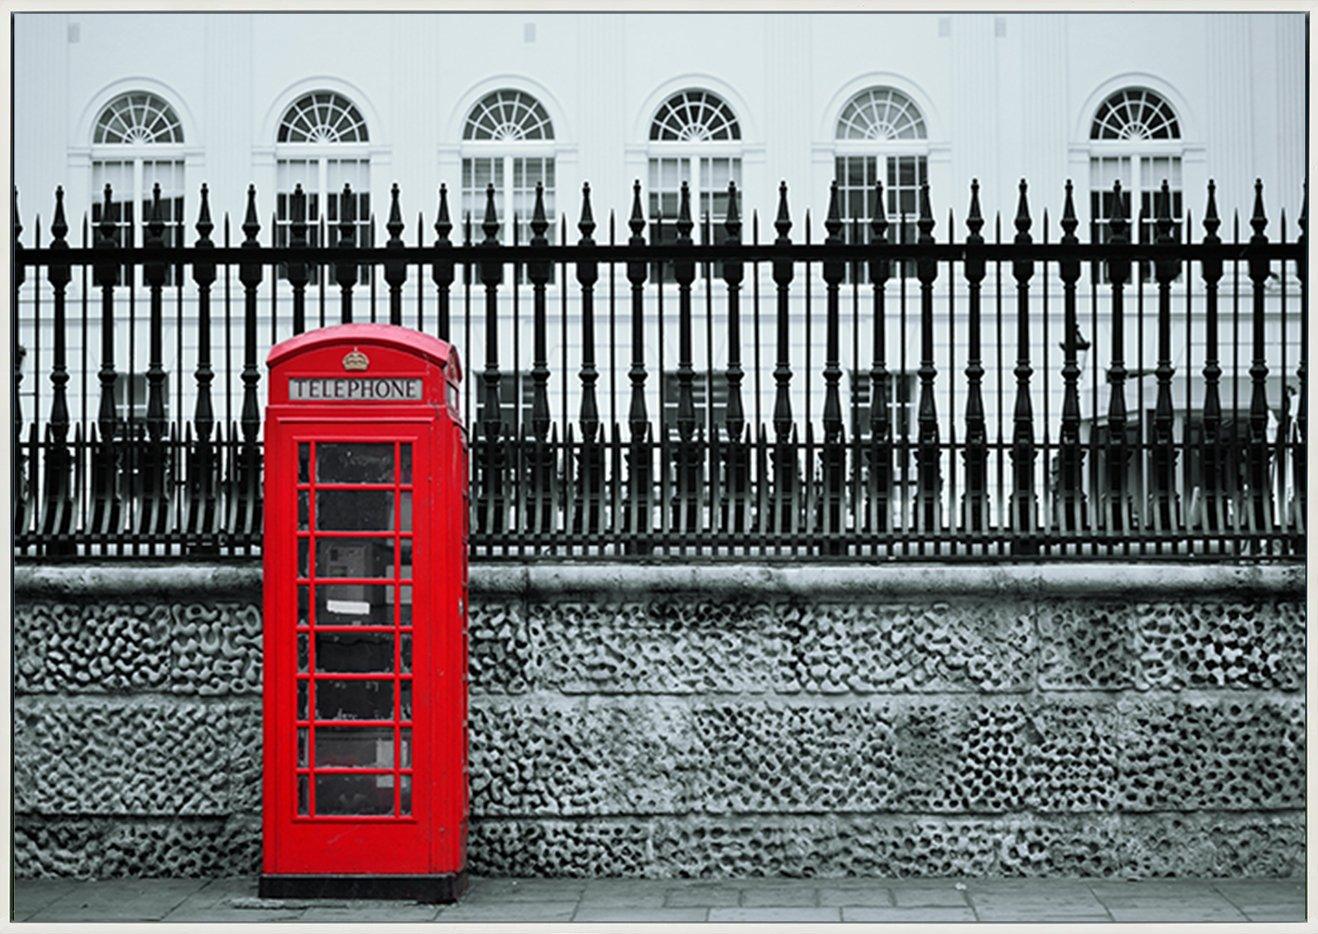 82853477 Red telephone box in street with historical architecture in London copy - ArtFramed